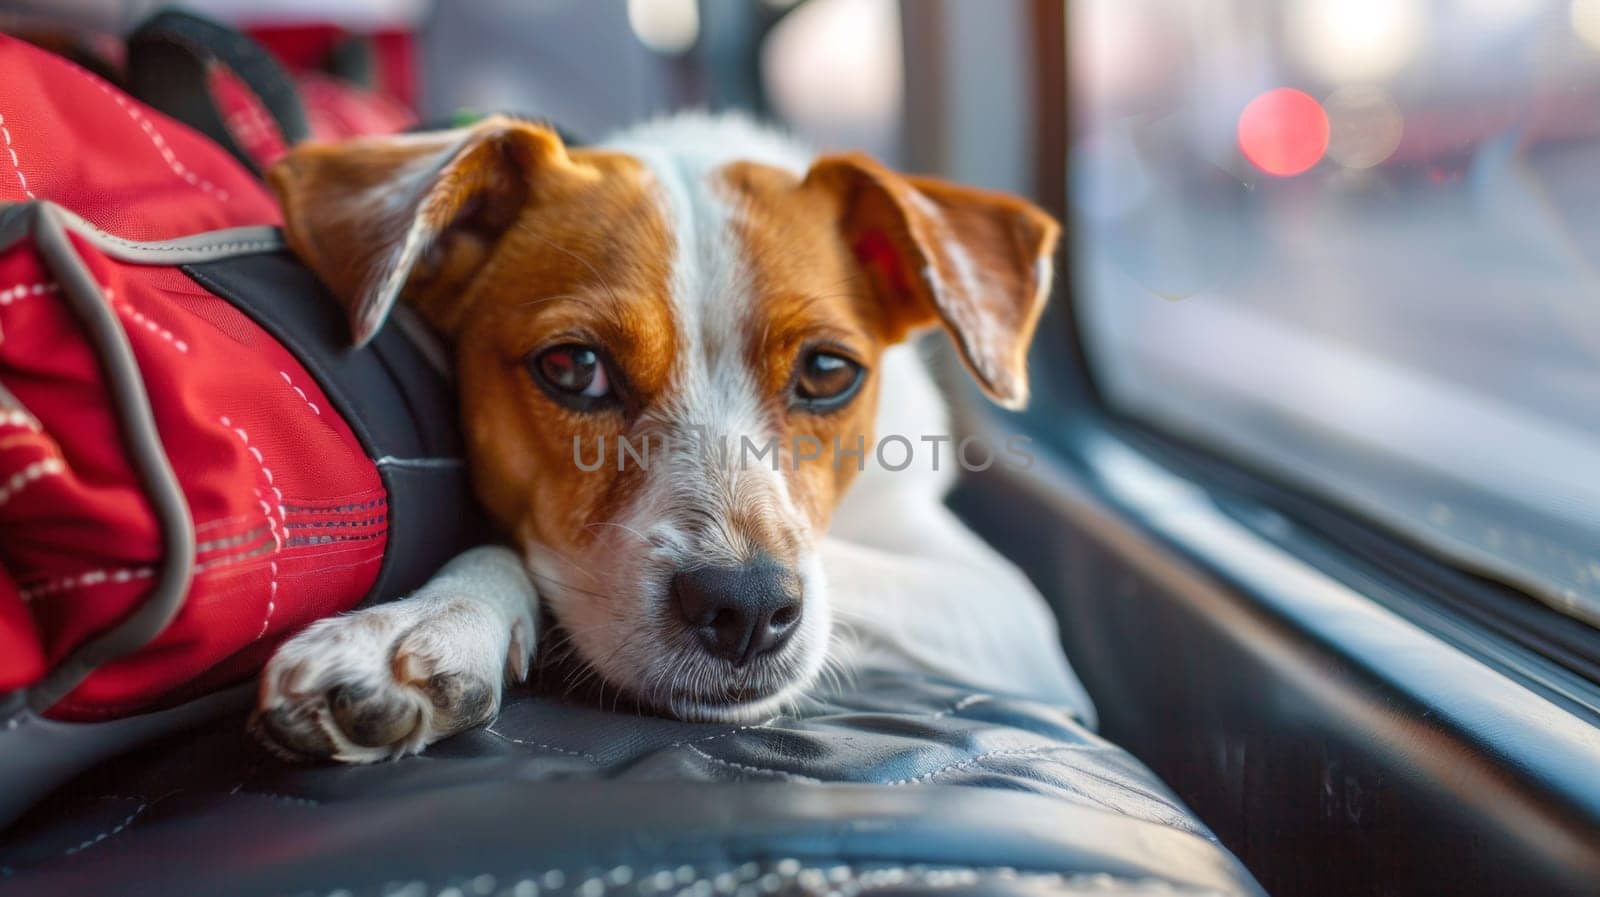 A dog laying on a seat with his head resting against the window